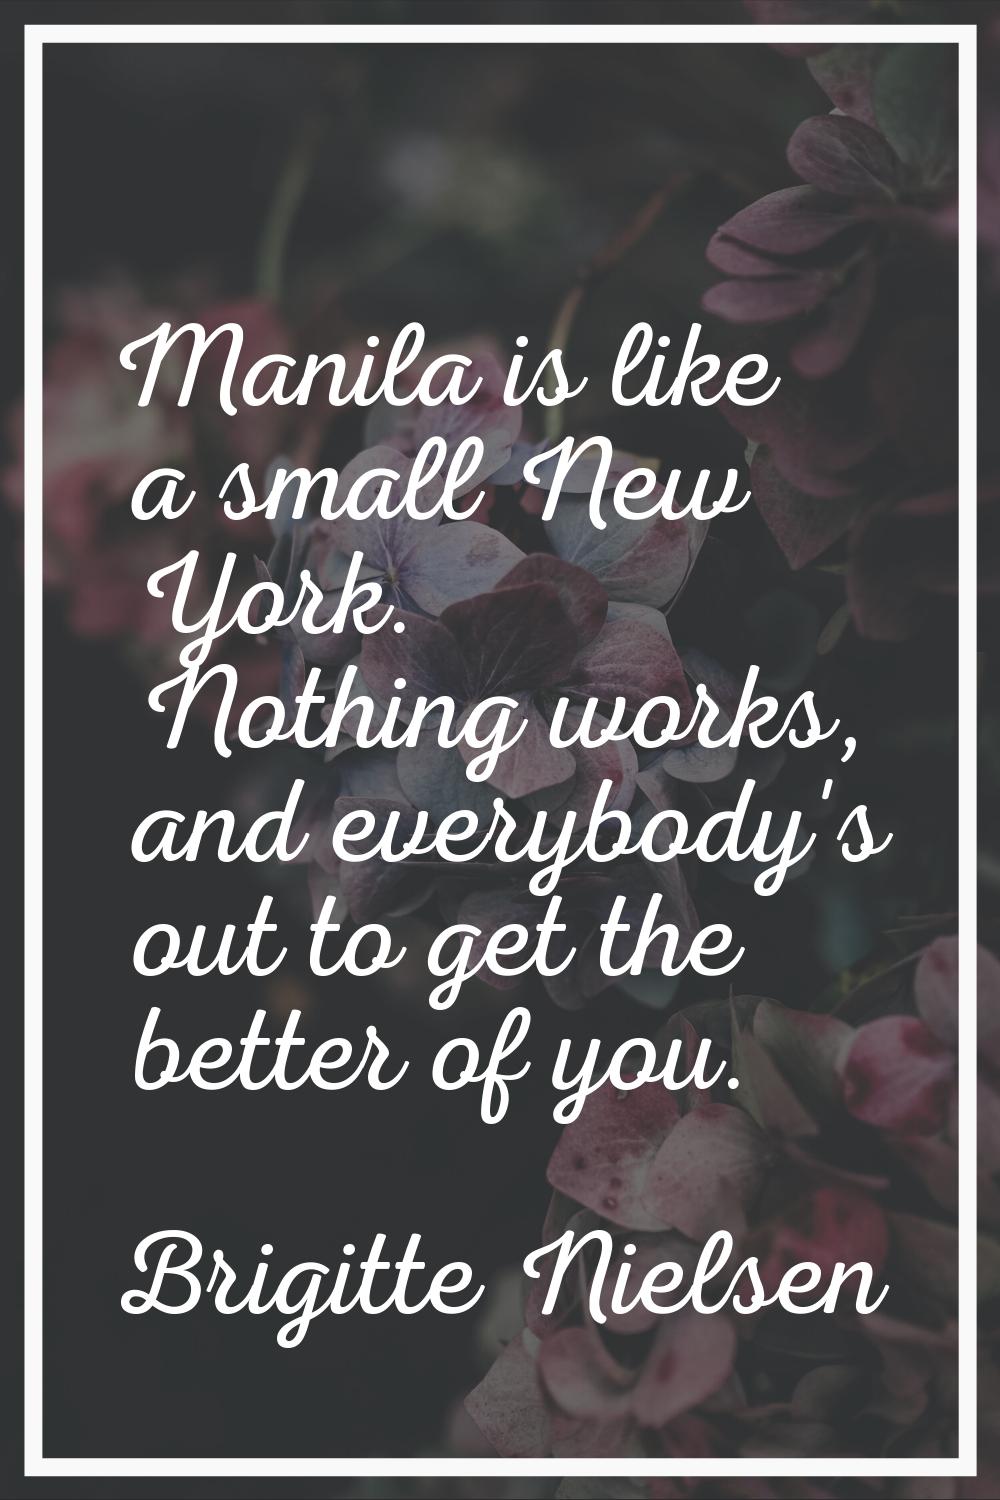 Manila is like a small New York. Nothing works, and everybody's out to get the better of you.